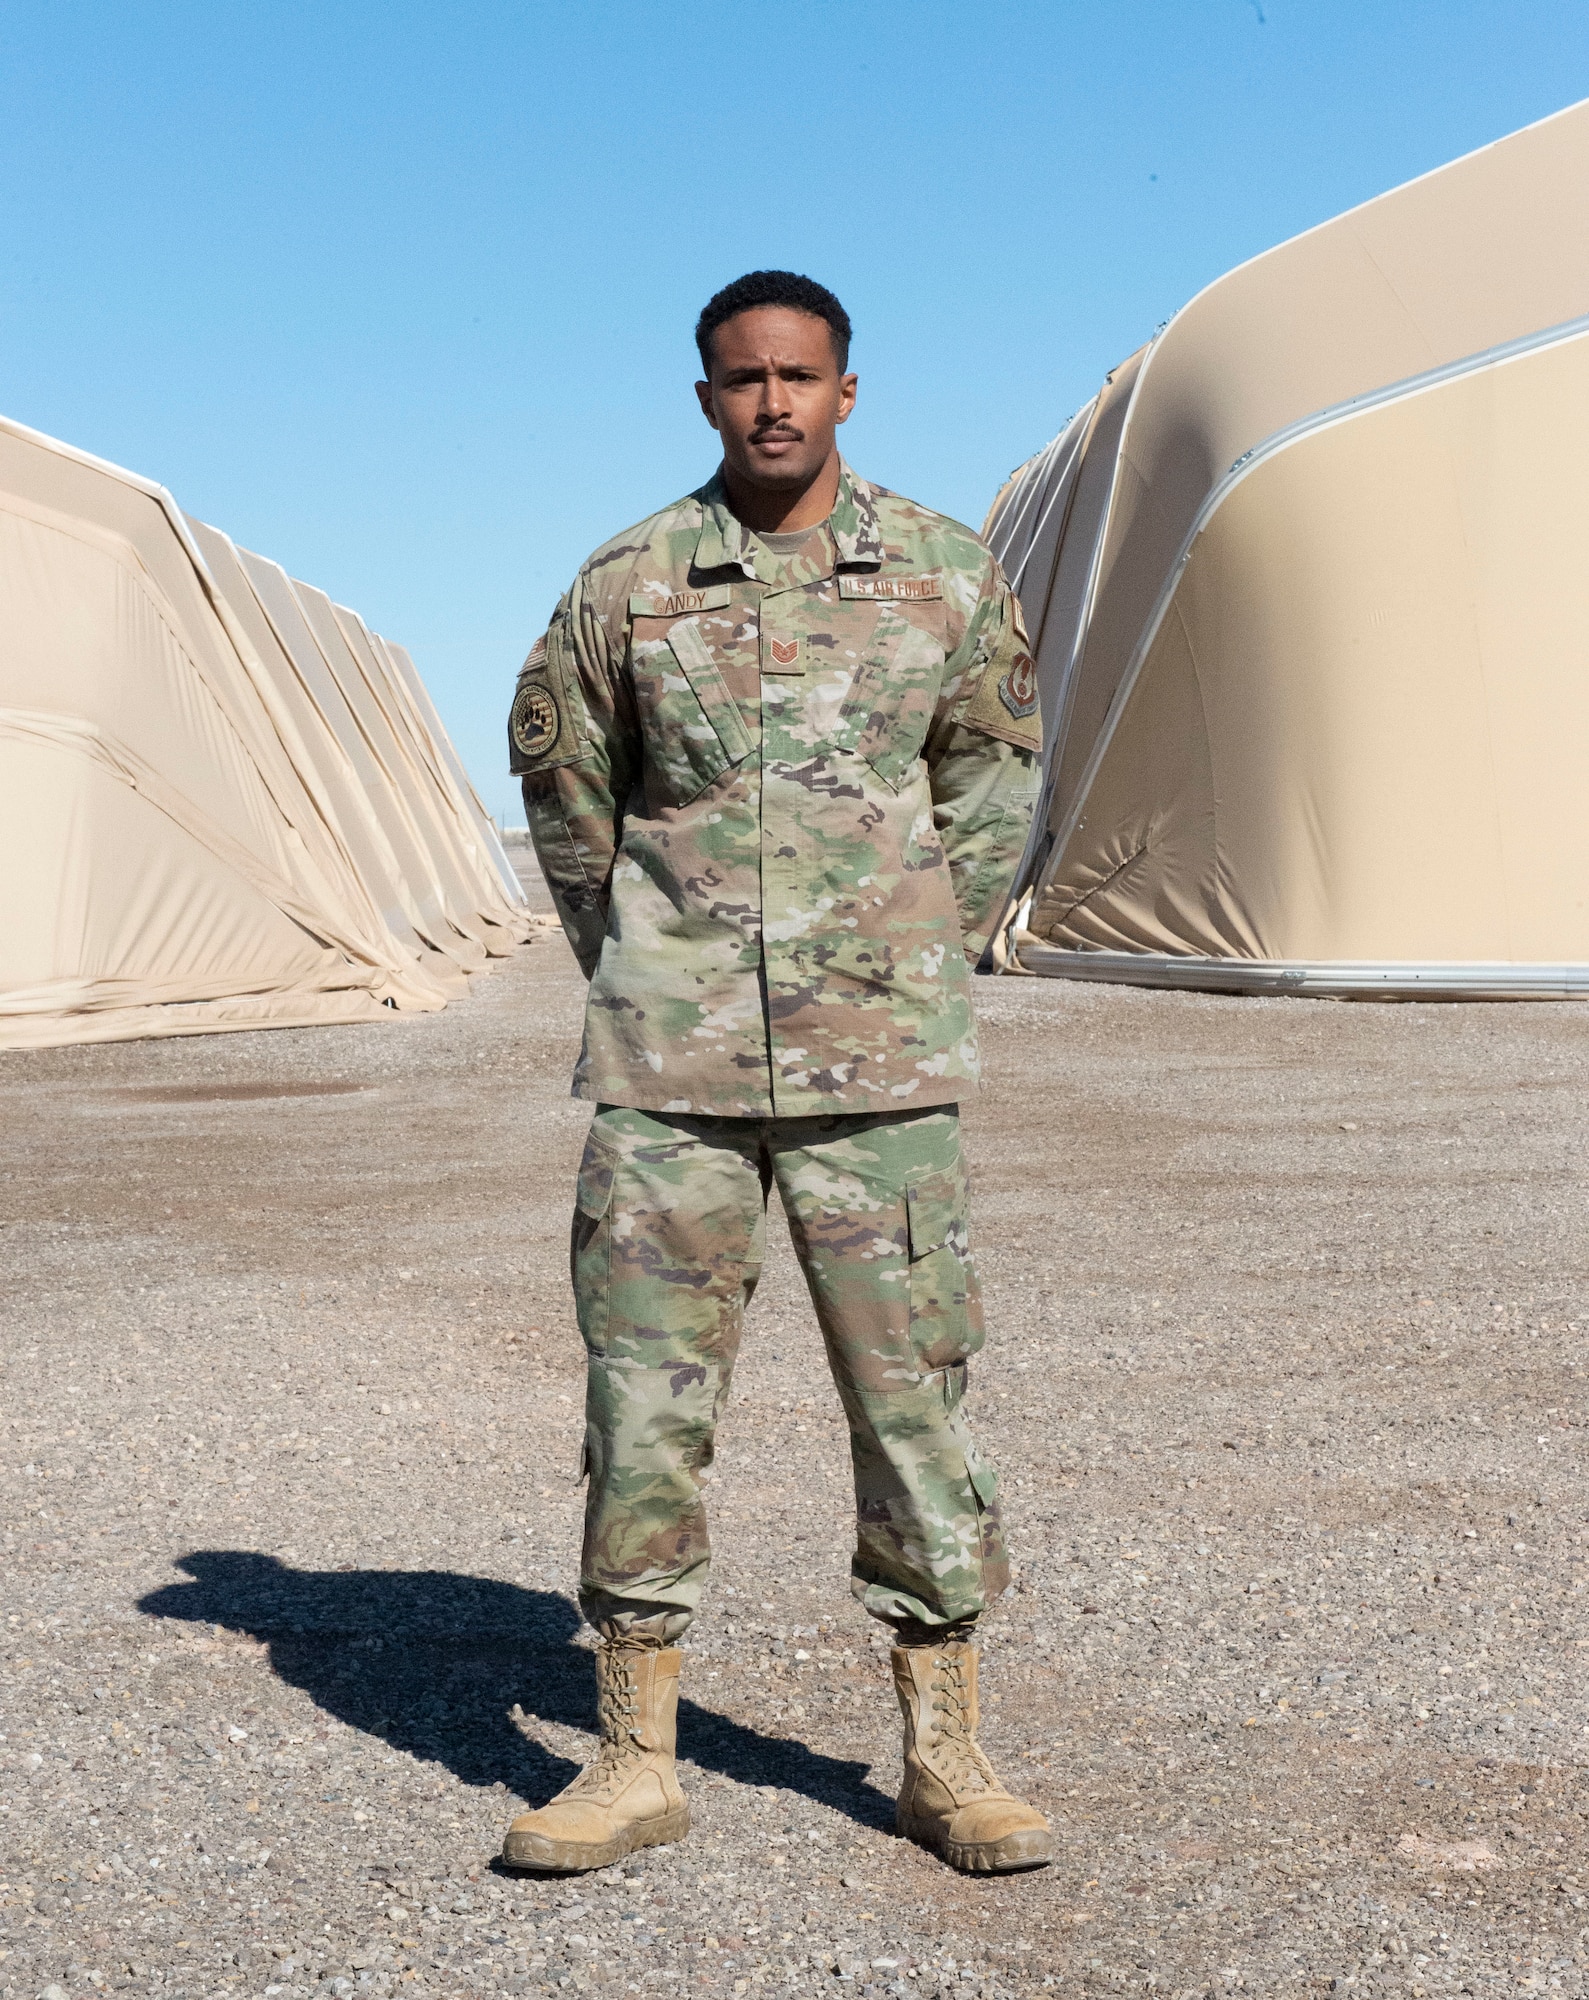 Tech. Sgt. Zachariah Gandy, 635th Materiel Maintenance Squadron contingency trainer, poses for a portrait Feb. 10, 2022, on Holloman Air Force Base, New Mexico. As a contingency trainer, Gandy serves as the facilitator in training others on how to build, maintain and demolish shelters for the U.S. Air Force’s only Basic Expeditionary Airfield Resources Base. Gandy sites diversity as a key player in getting the mission accomplished, “Diversity is the backbone of the Air Force. Without diversity, we’re stagnant.” (U.S. Air Force photo by Airman 1st Class Nicholas Paczkowski)